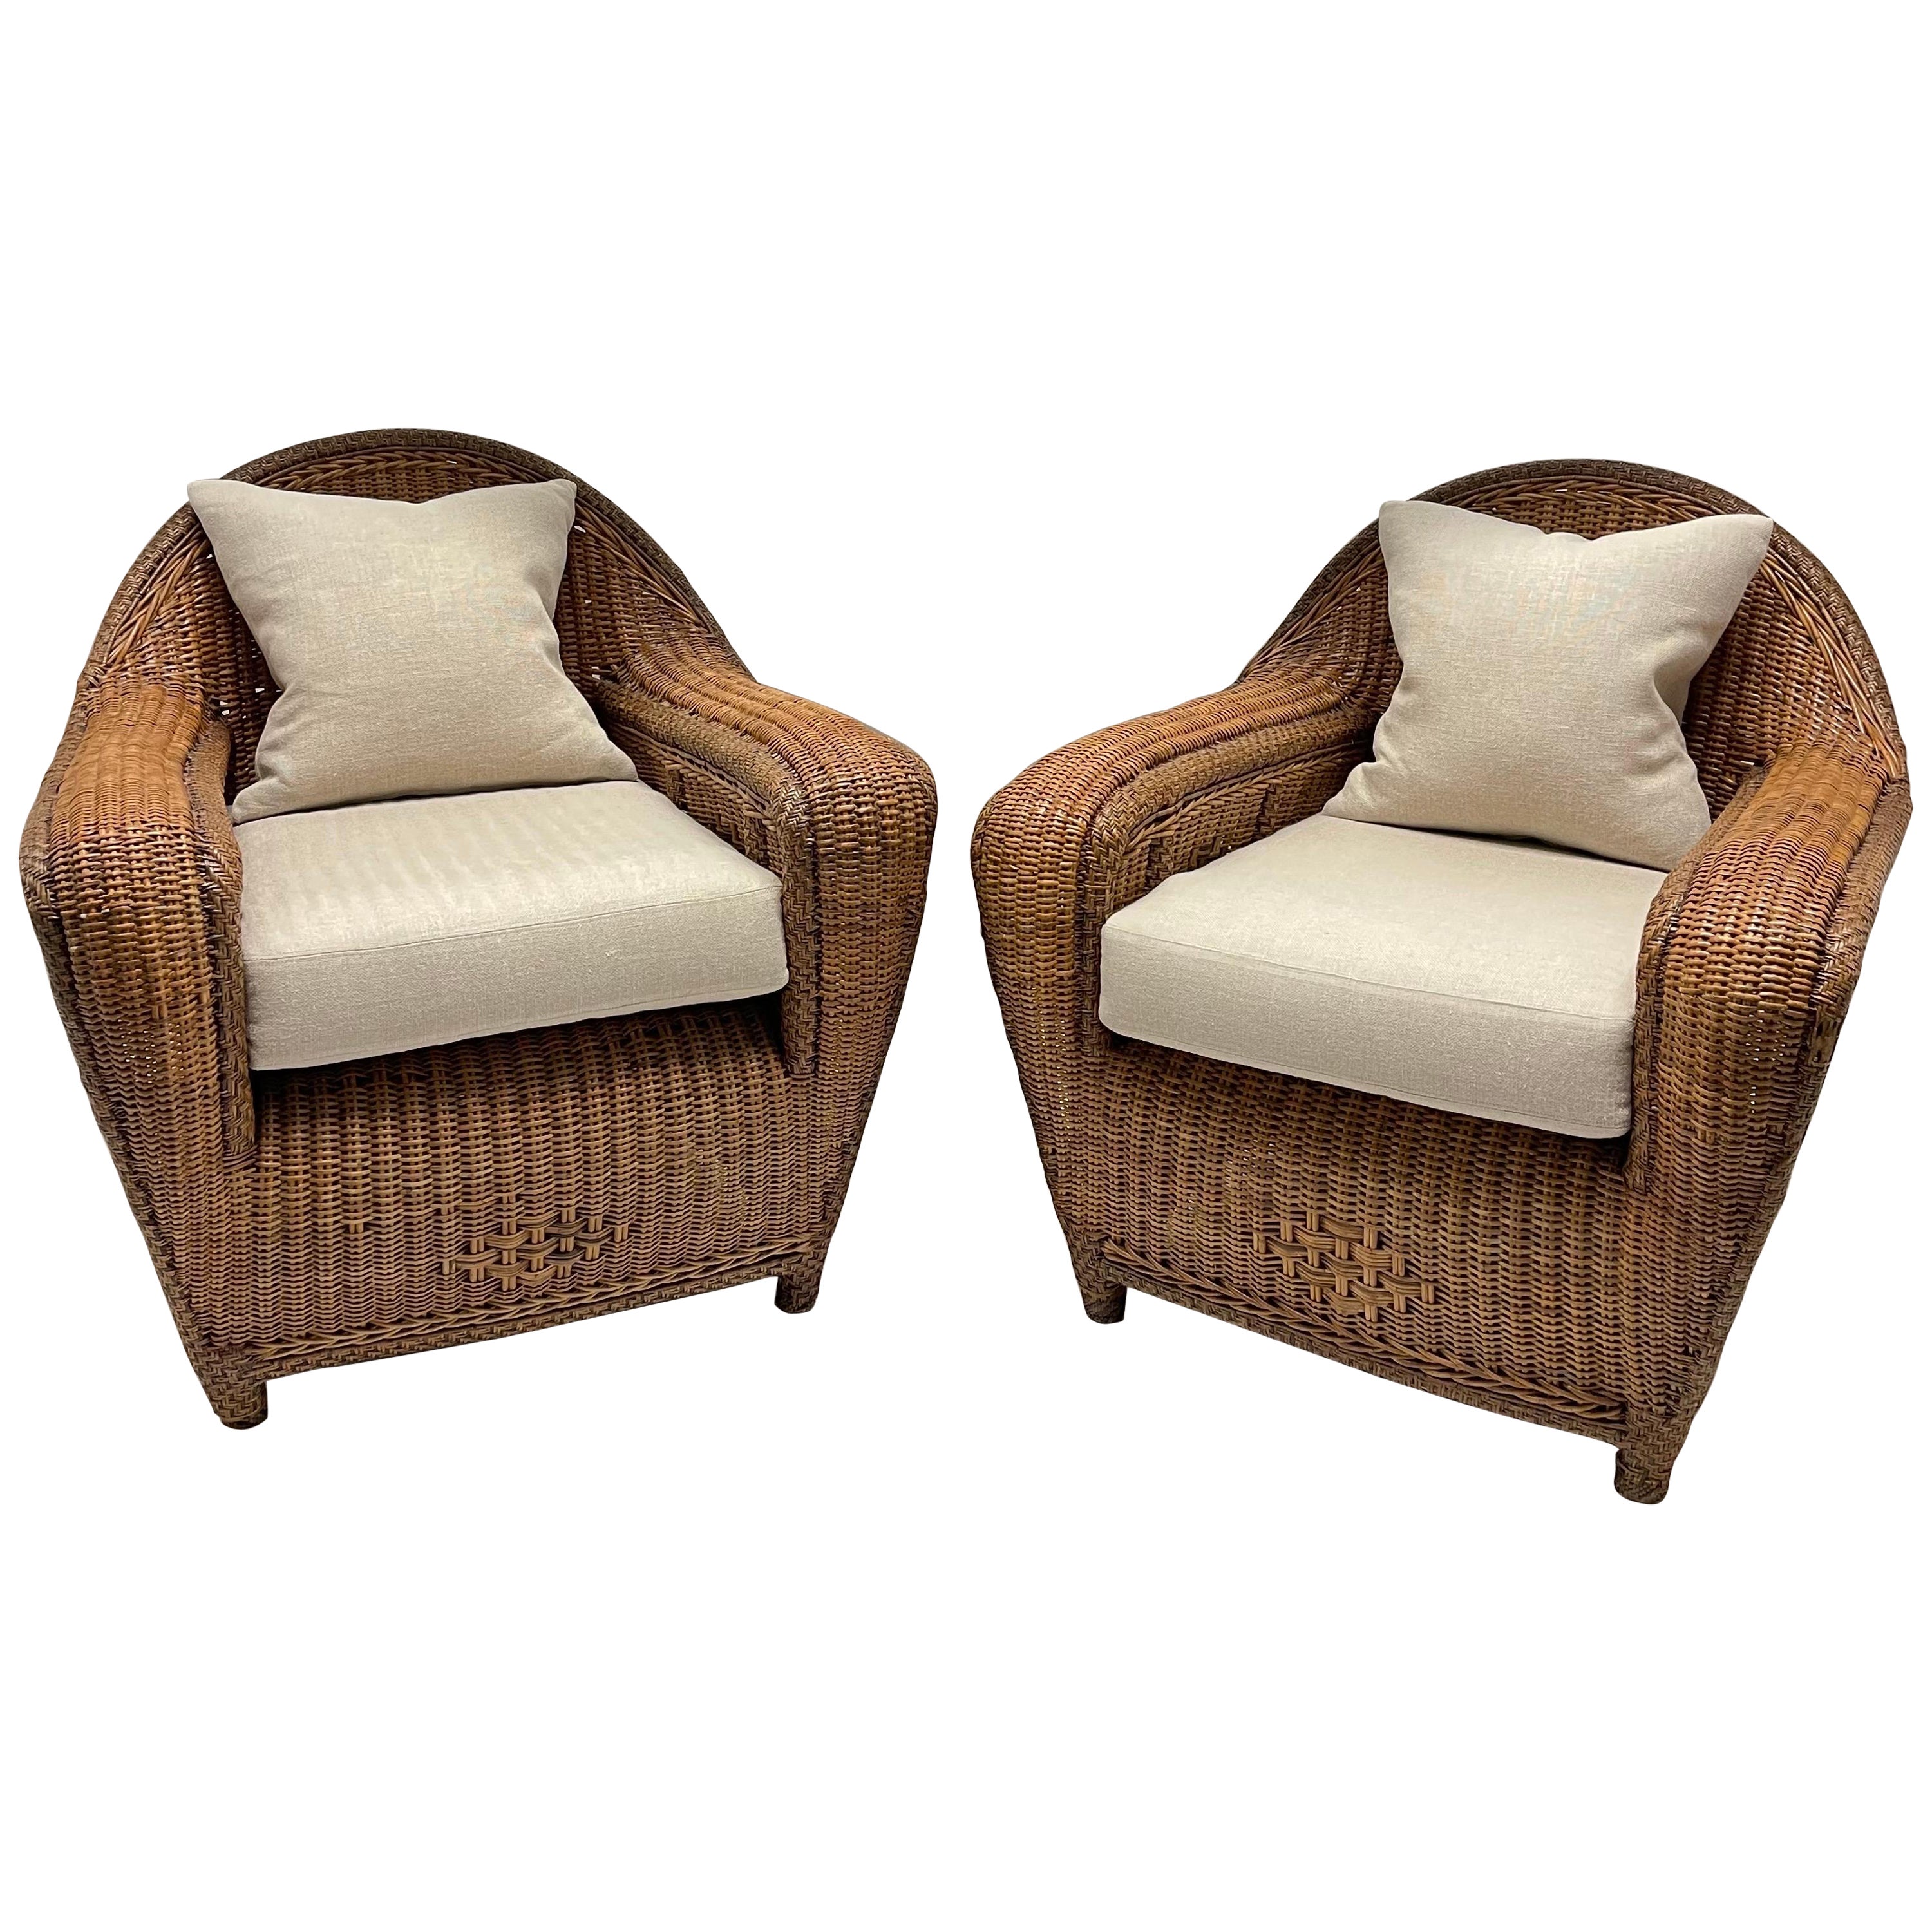 Rare Pair of Art Deco Wicker and Rattan Club Chairs or Armchairs, circa 1930s